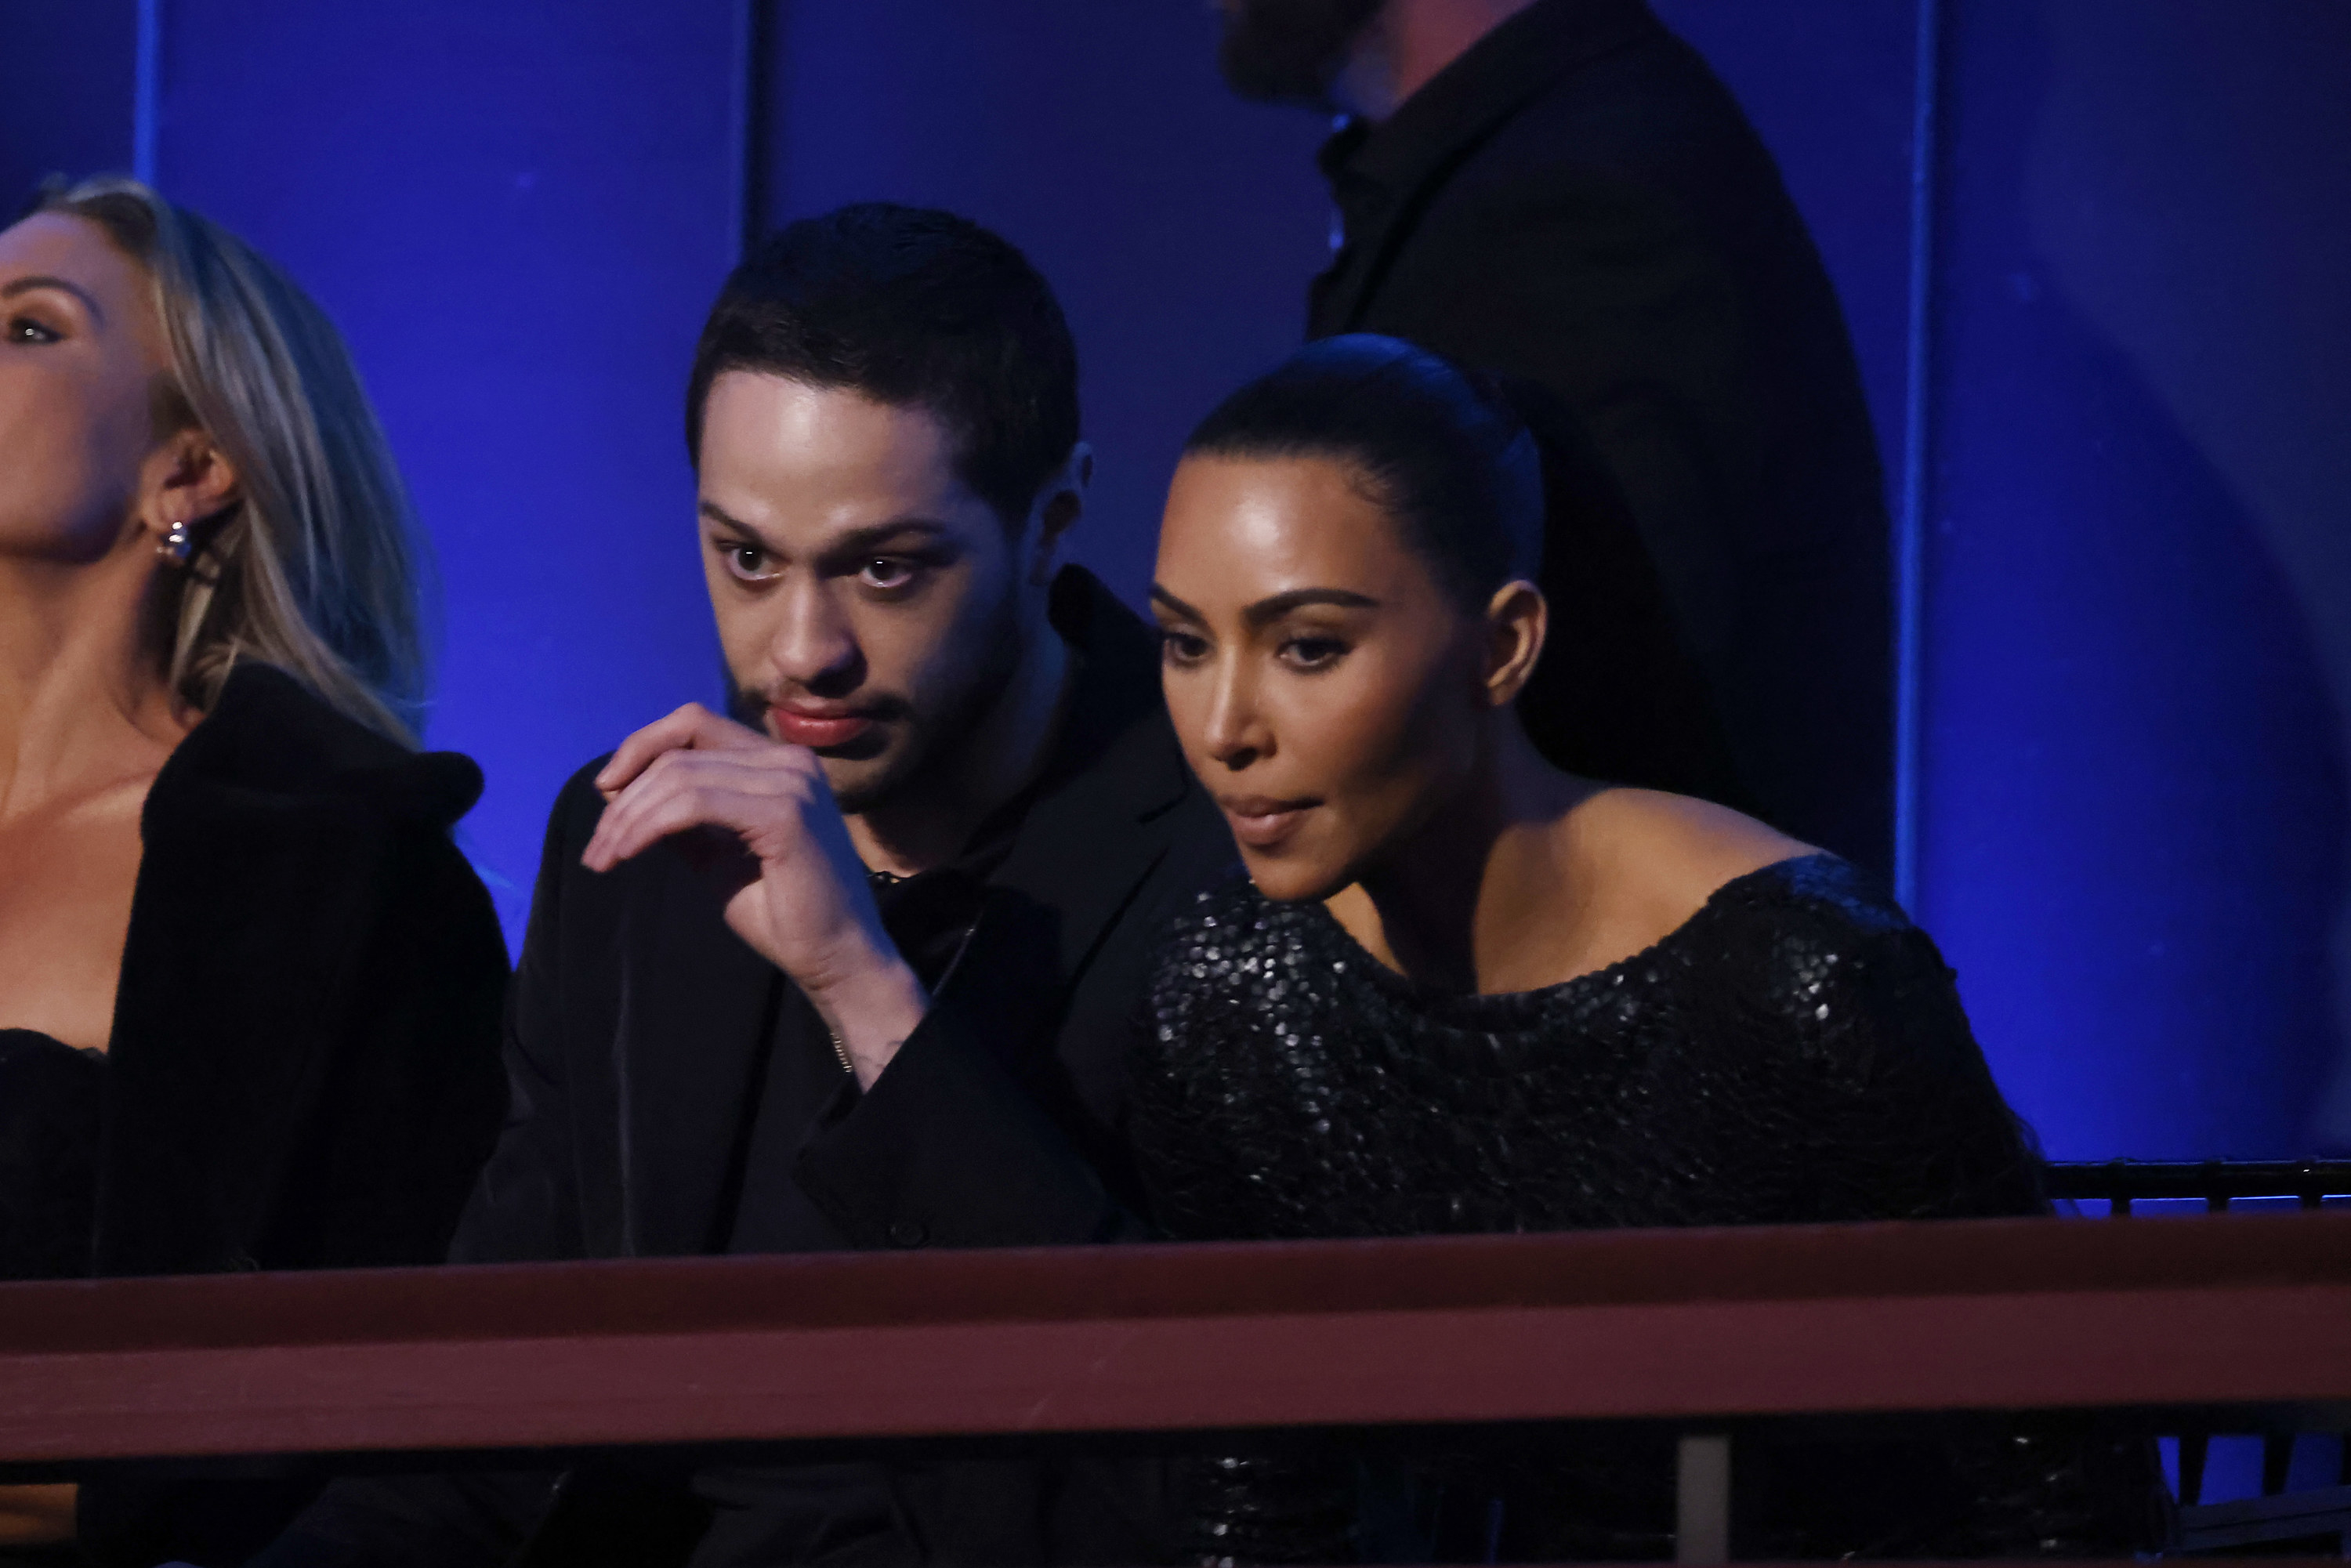 Pete and Kim sitting together in the audience